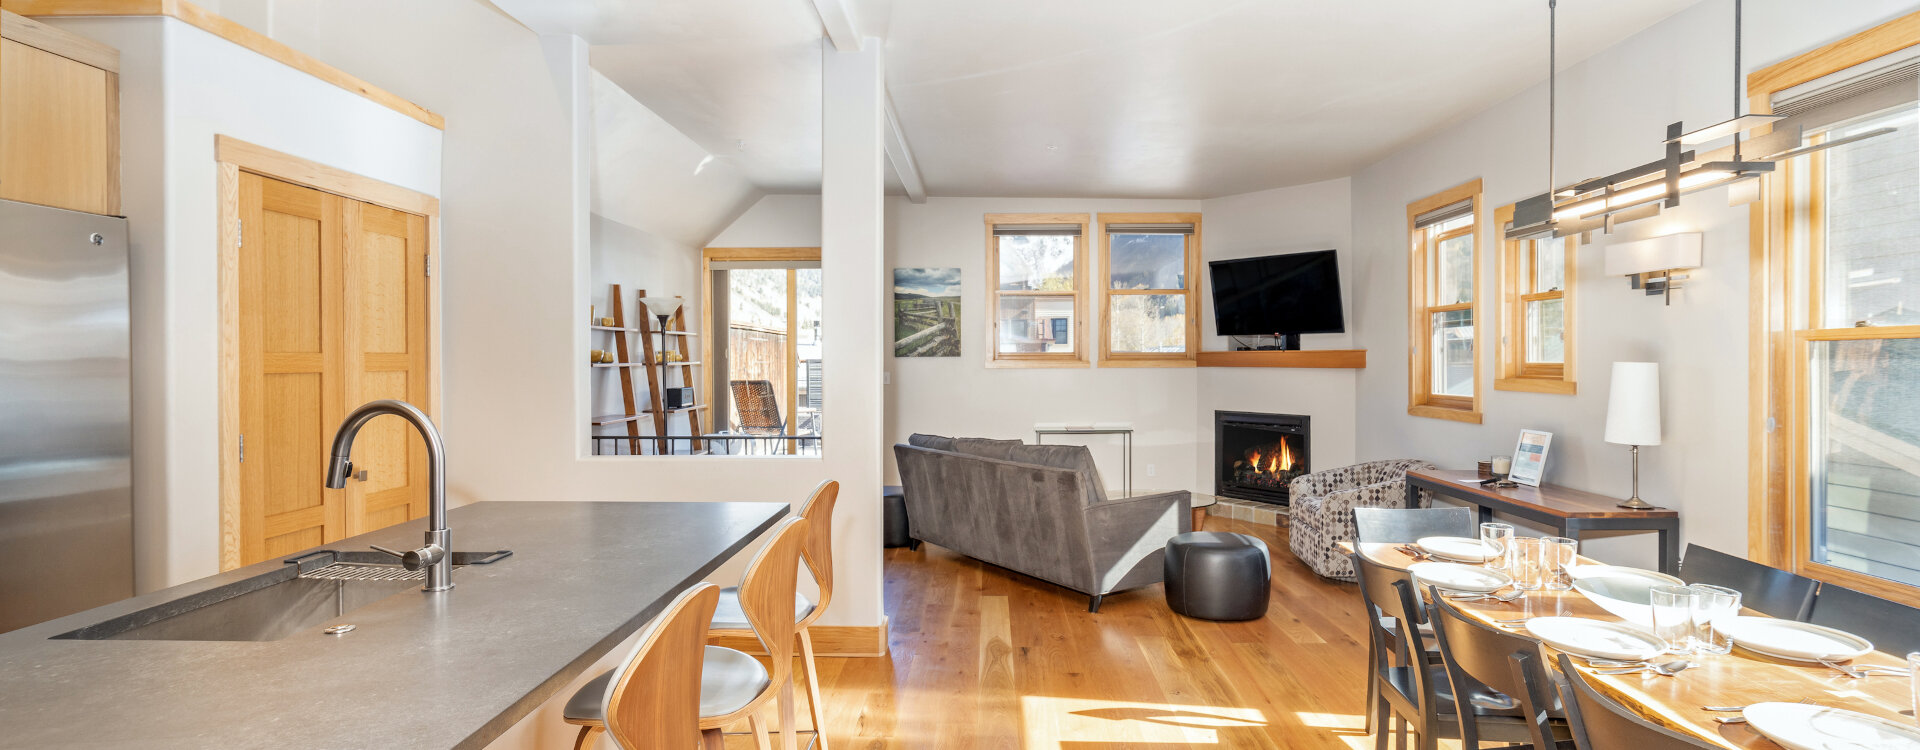 1.01-Telluride-Loft-at-Livery-Living-Areas